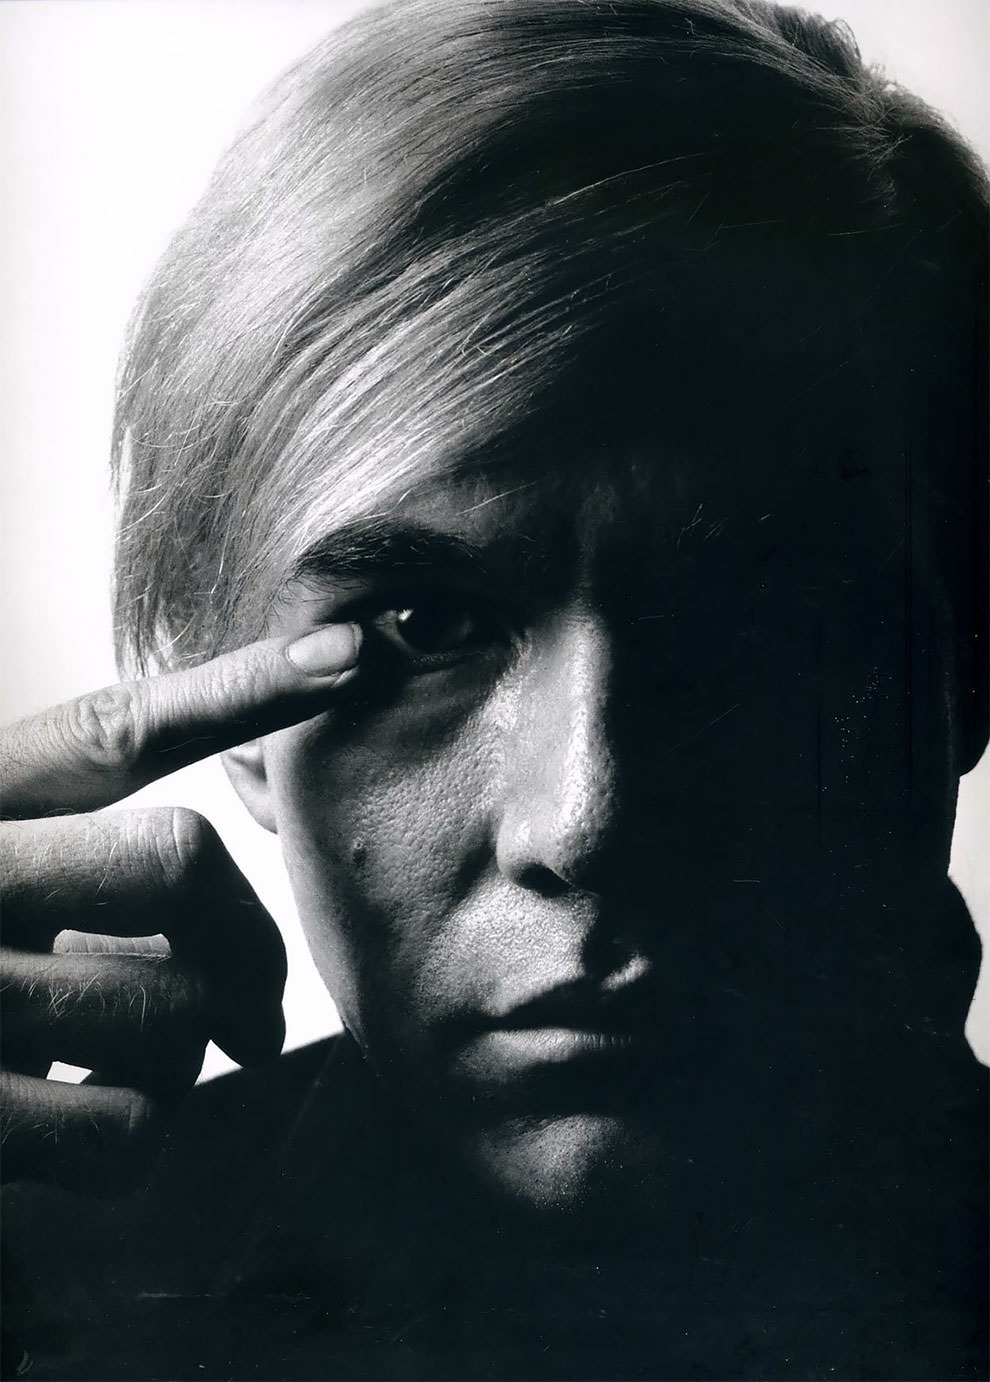 American painter and filmmaker Andy Warhol. USA, 1968.